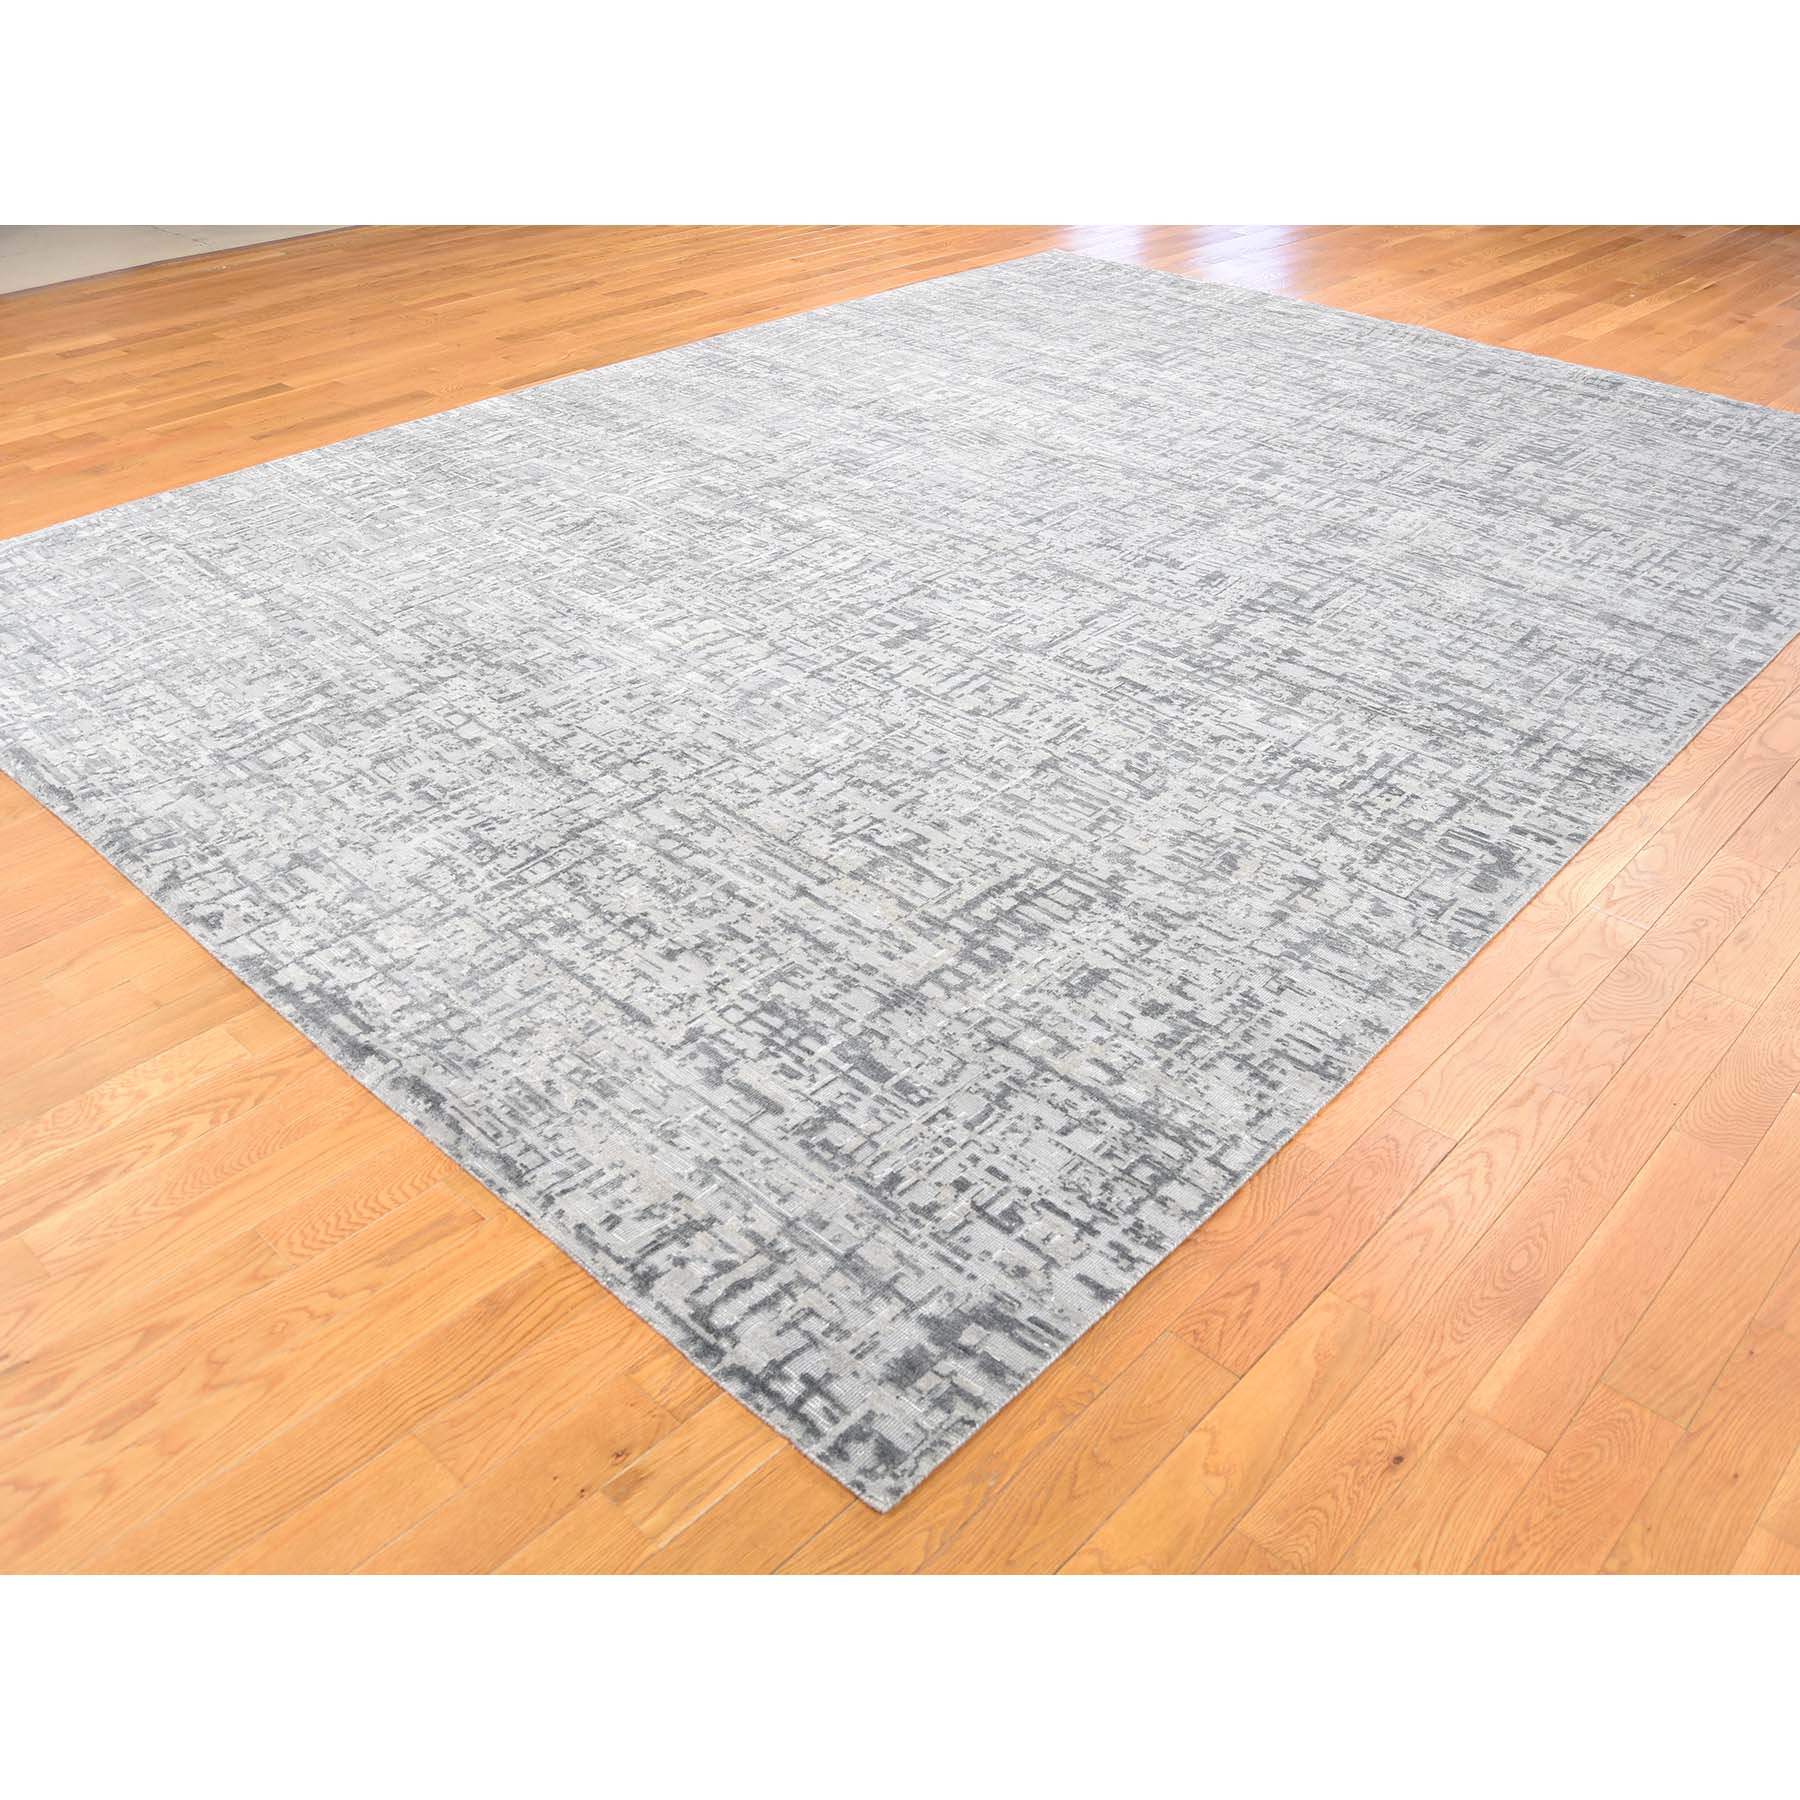 9-2 x12-4  THE MATRIX Pure Silk with Textured Wool Tone on Tone Hand-Knotted Rug 